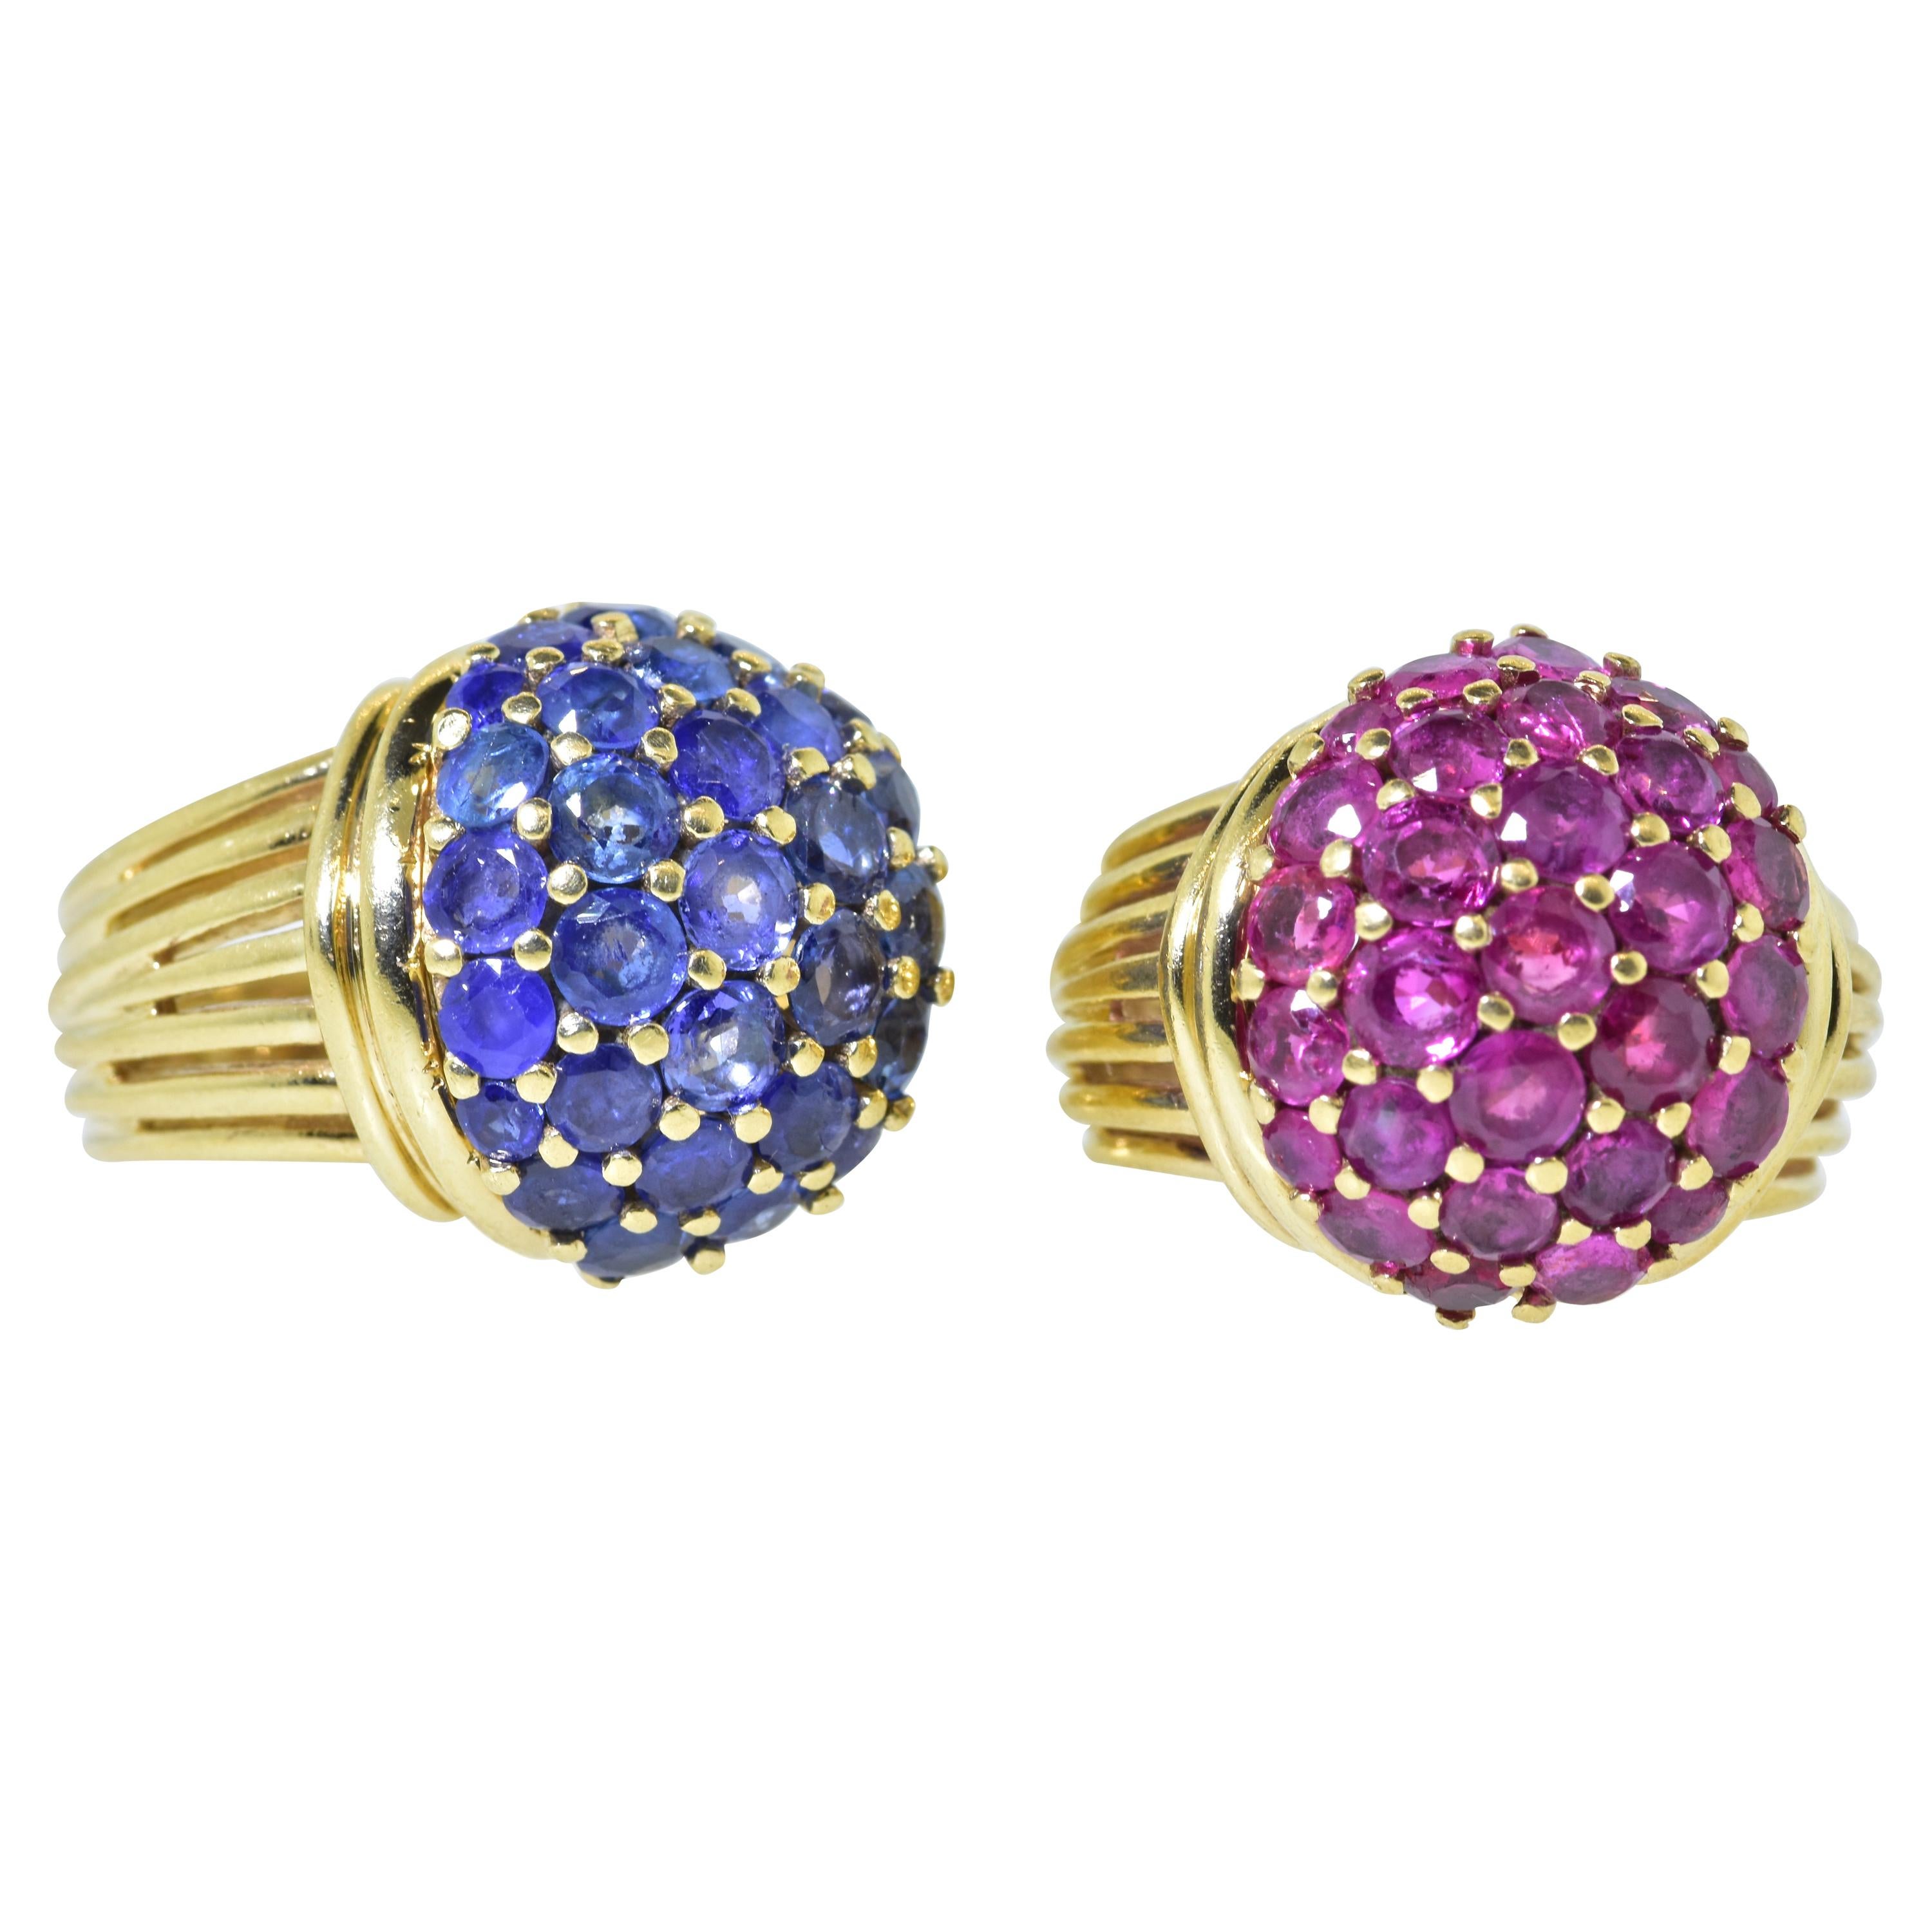 Retro Sapphire and Rubies Dome Style Vintage Yellow Gold Rings, circa 1955, Pair